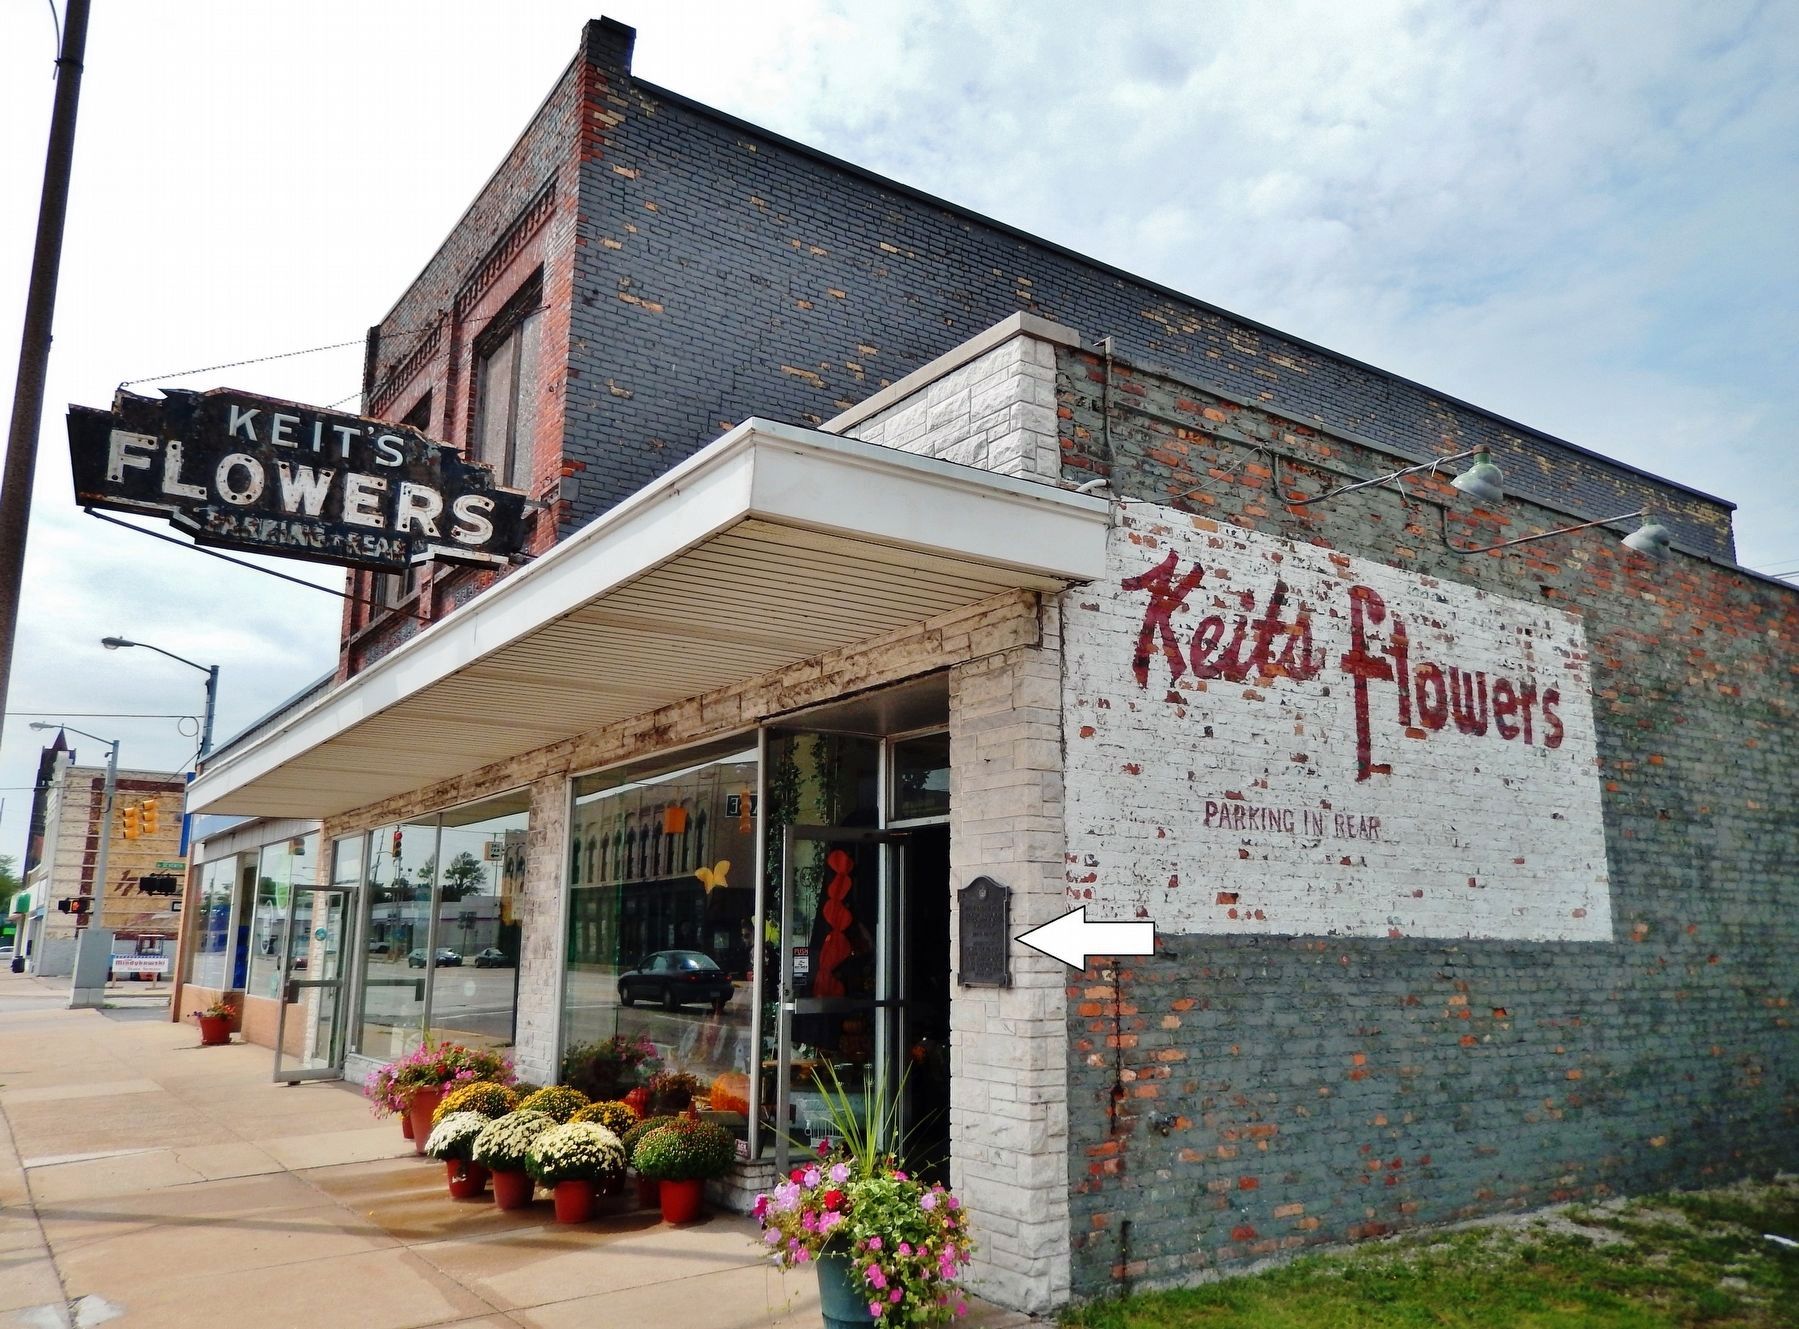 Keit's Flowers (<i>northeast corner view; marker visible at corner of building</i>) image, Touch for more information